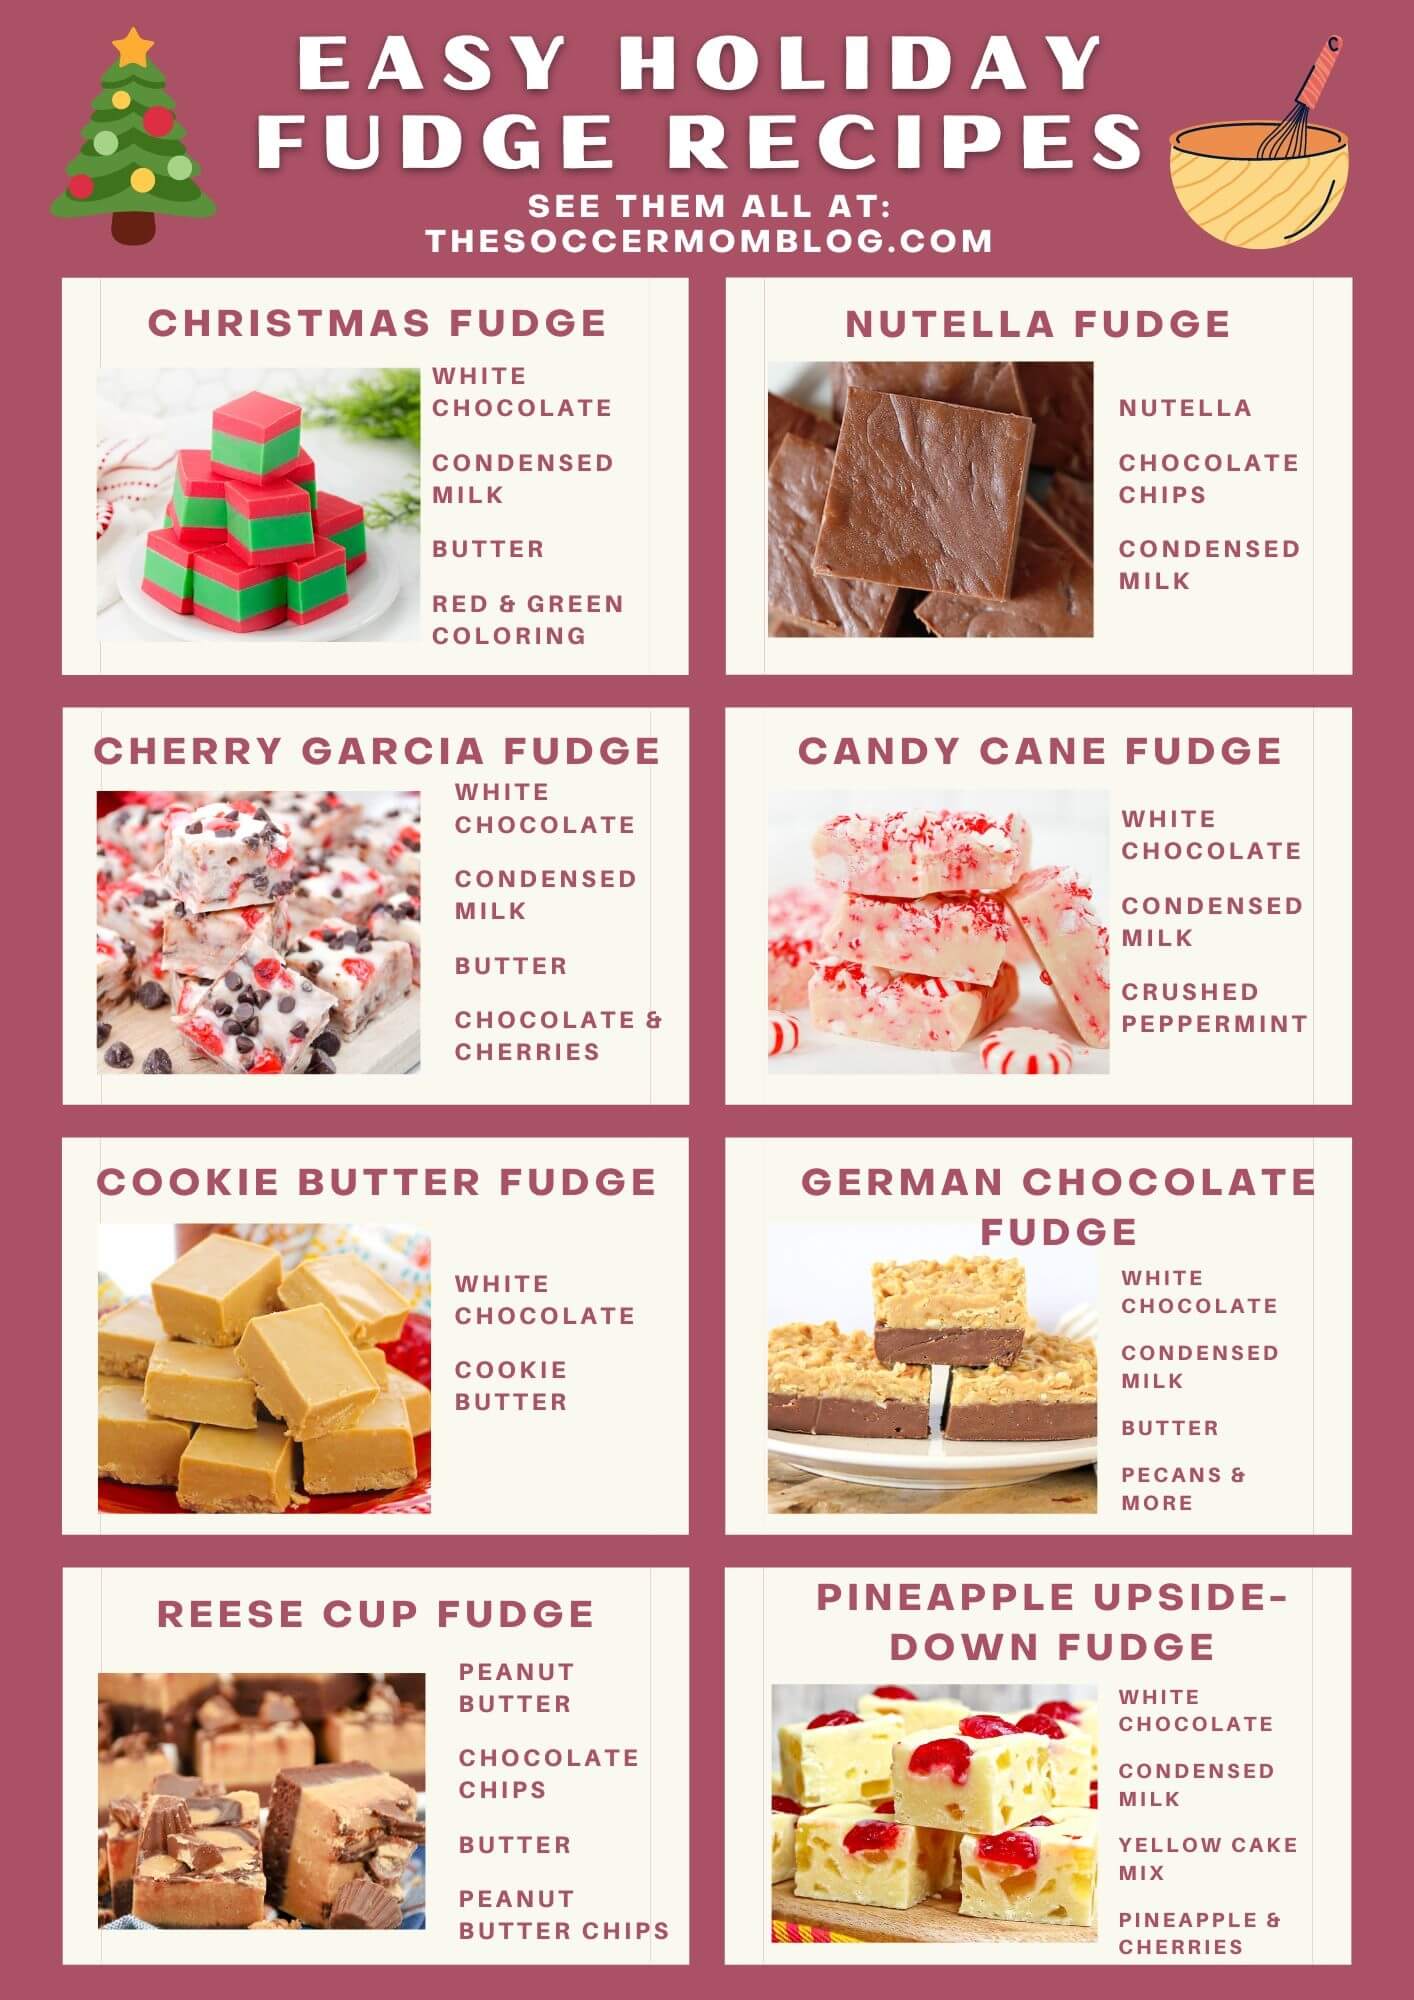 infographic with 8 fudge recipe idea photos and ingredient lists